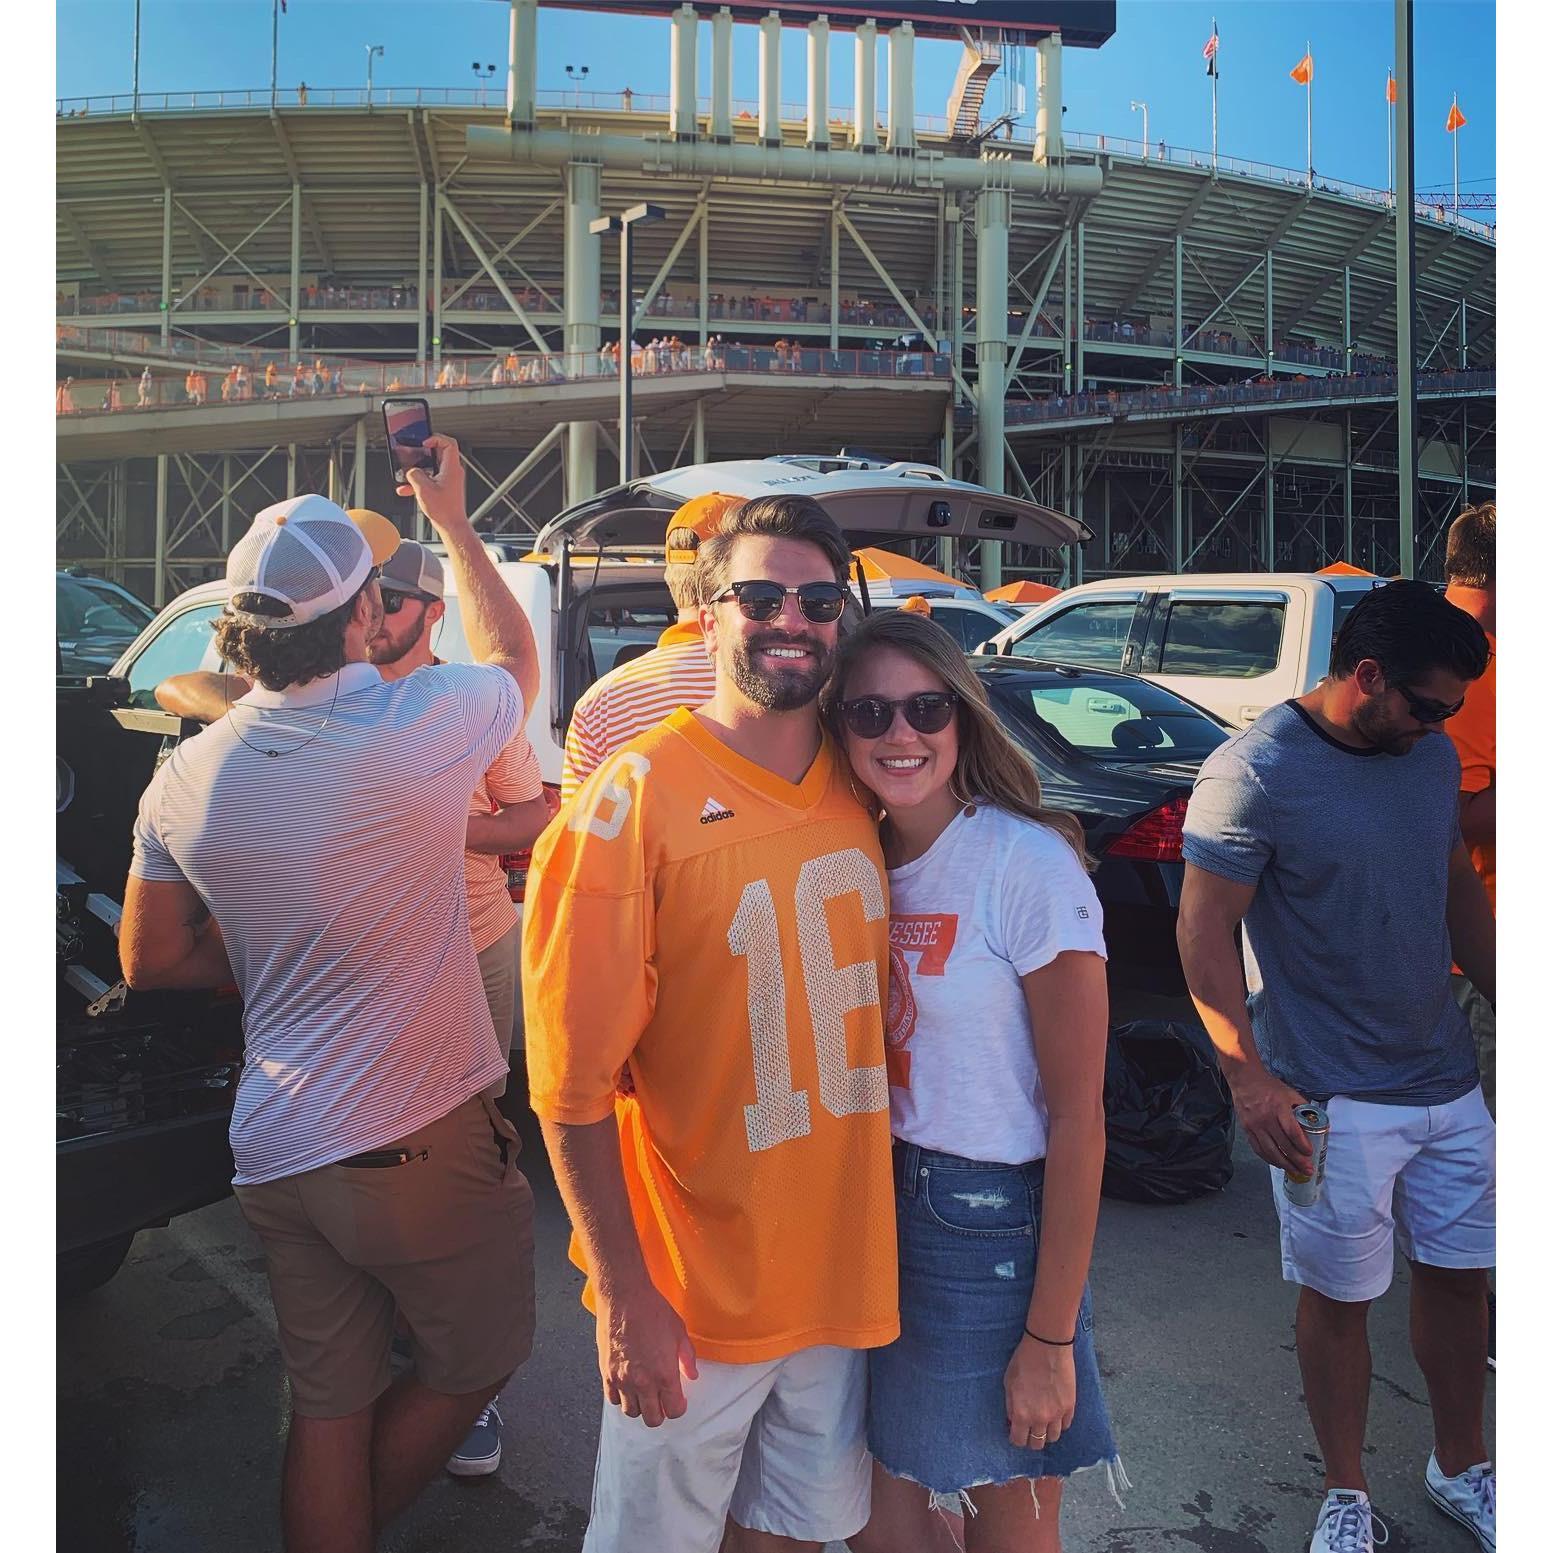 First University of Tennessee game together